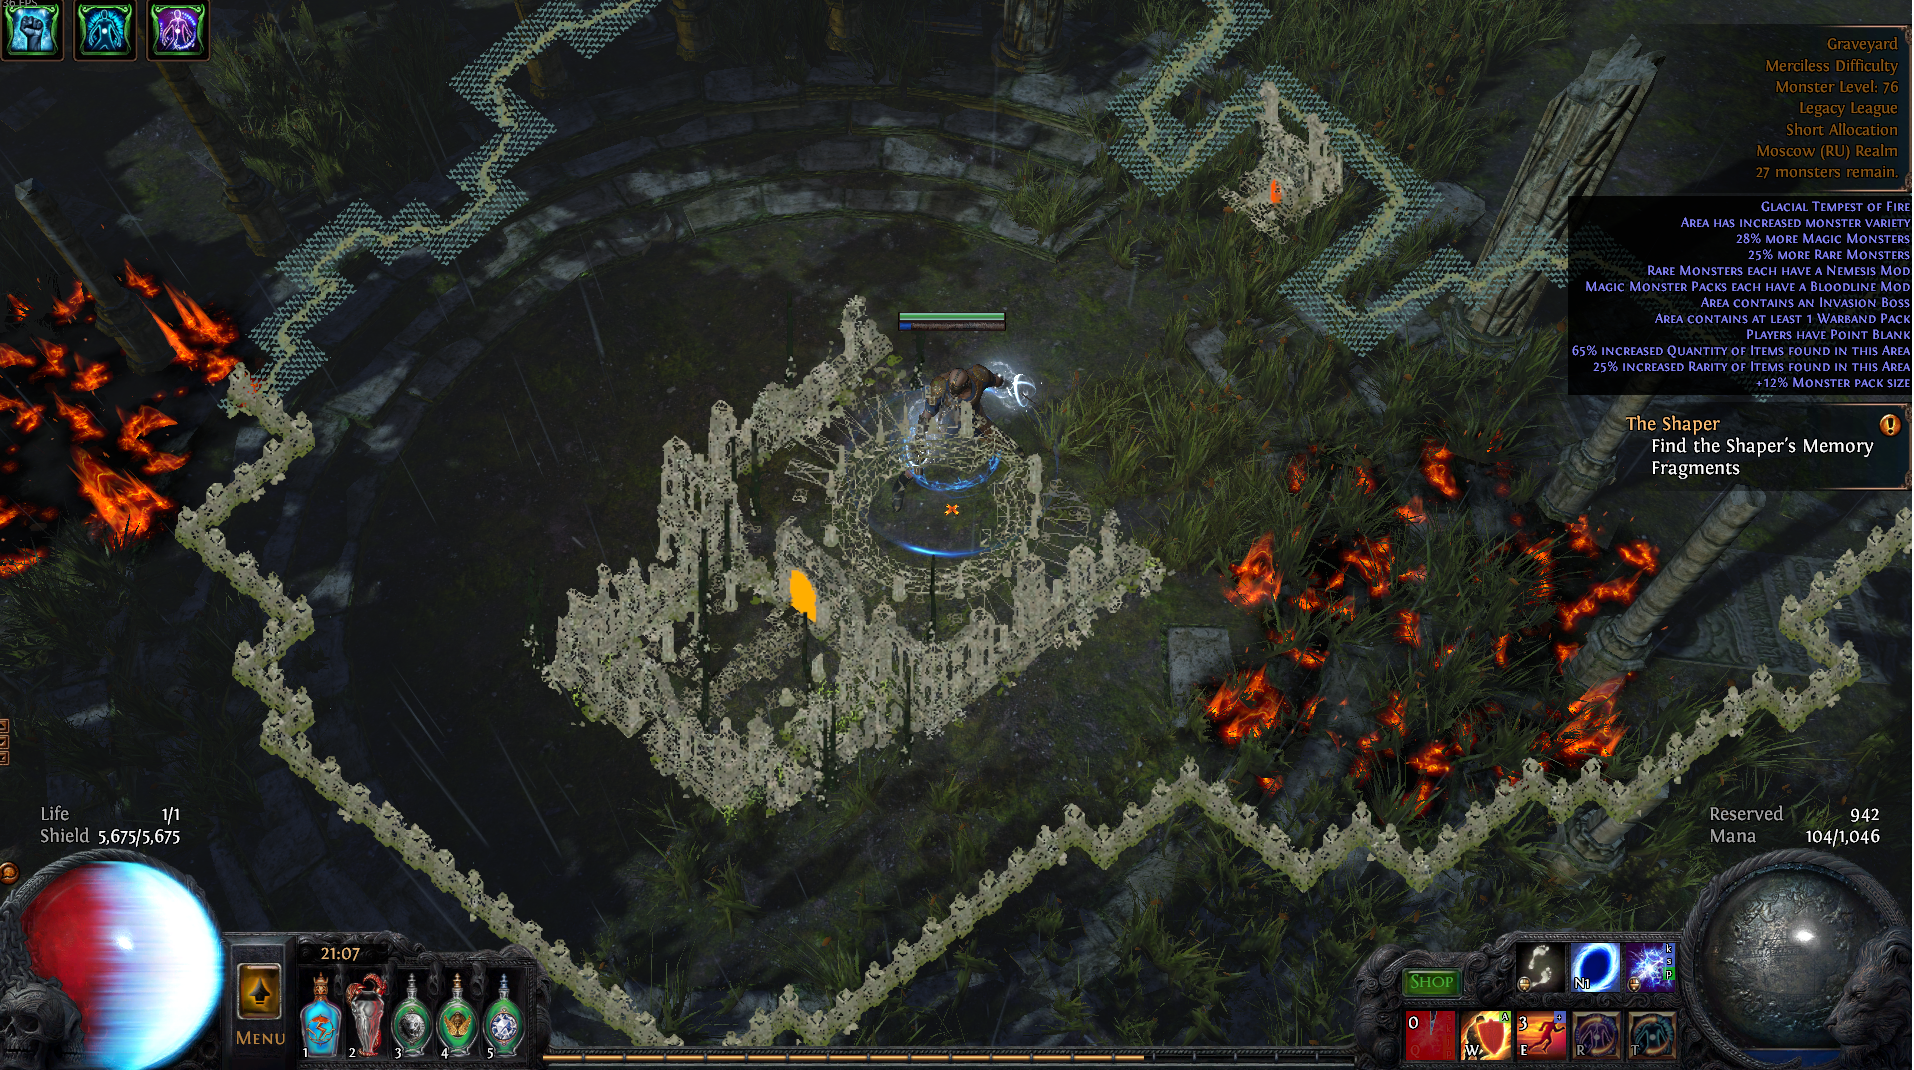 Path of exile некрополь. Cemetery карта пое. Cemetery Map POE. Path of Exile карта погоста. Graveyard Map POE.